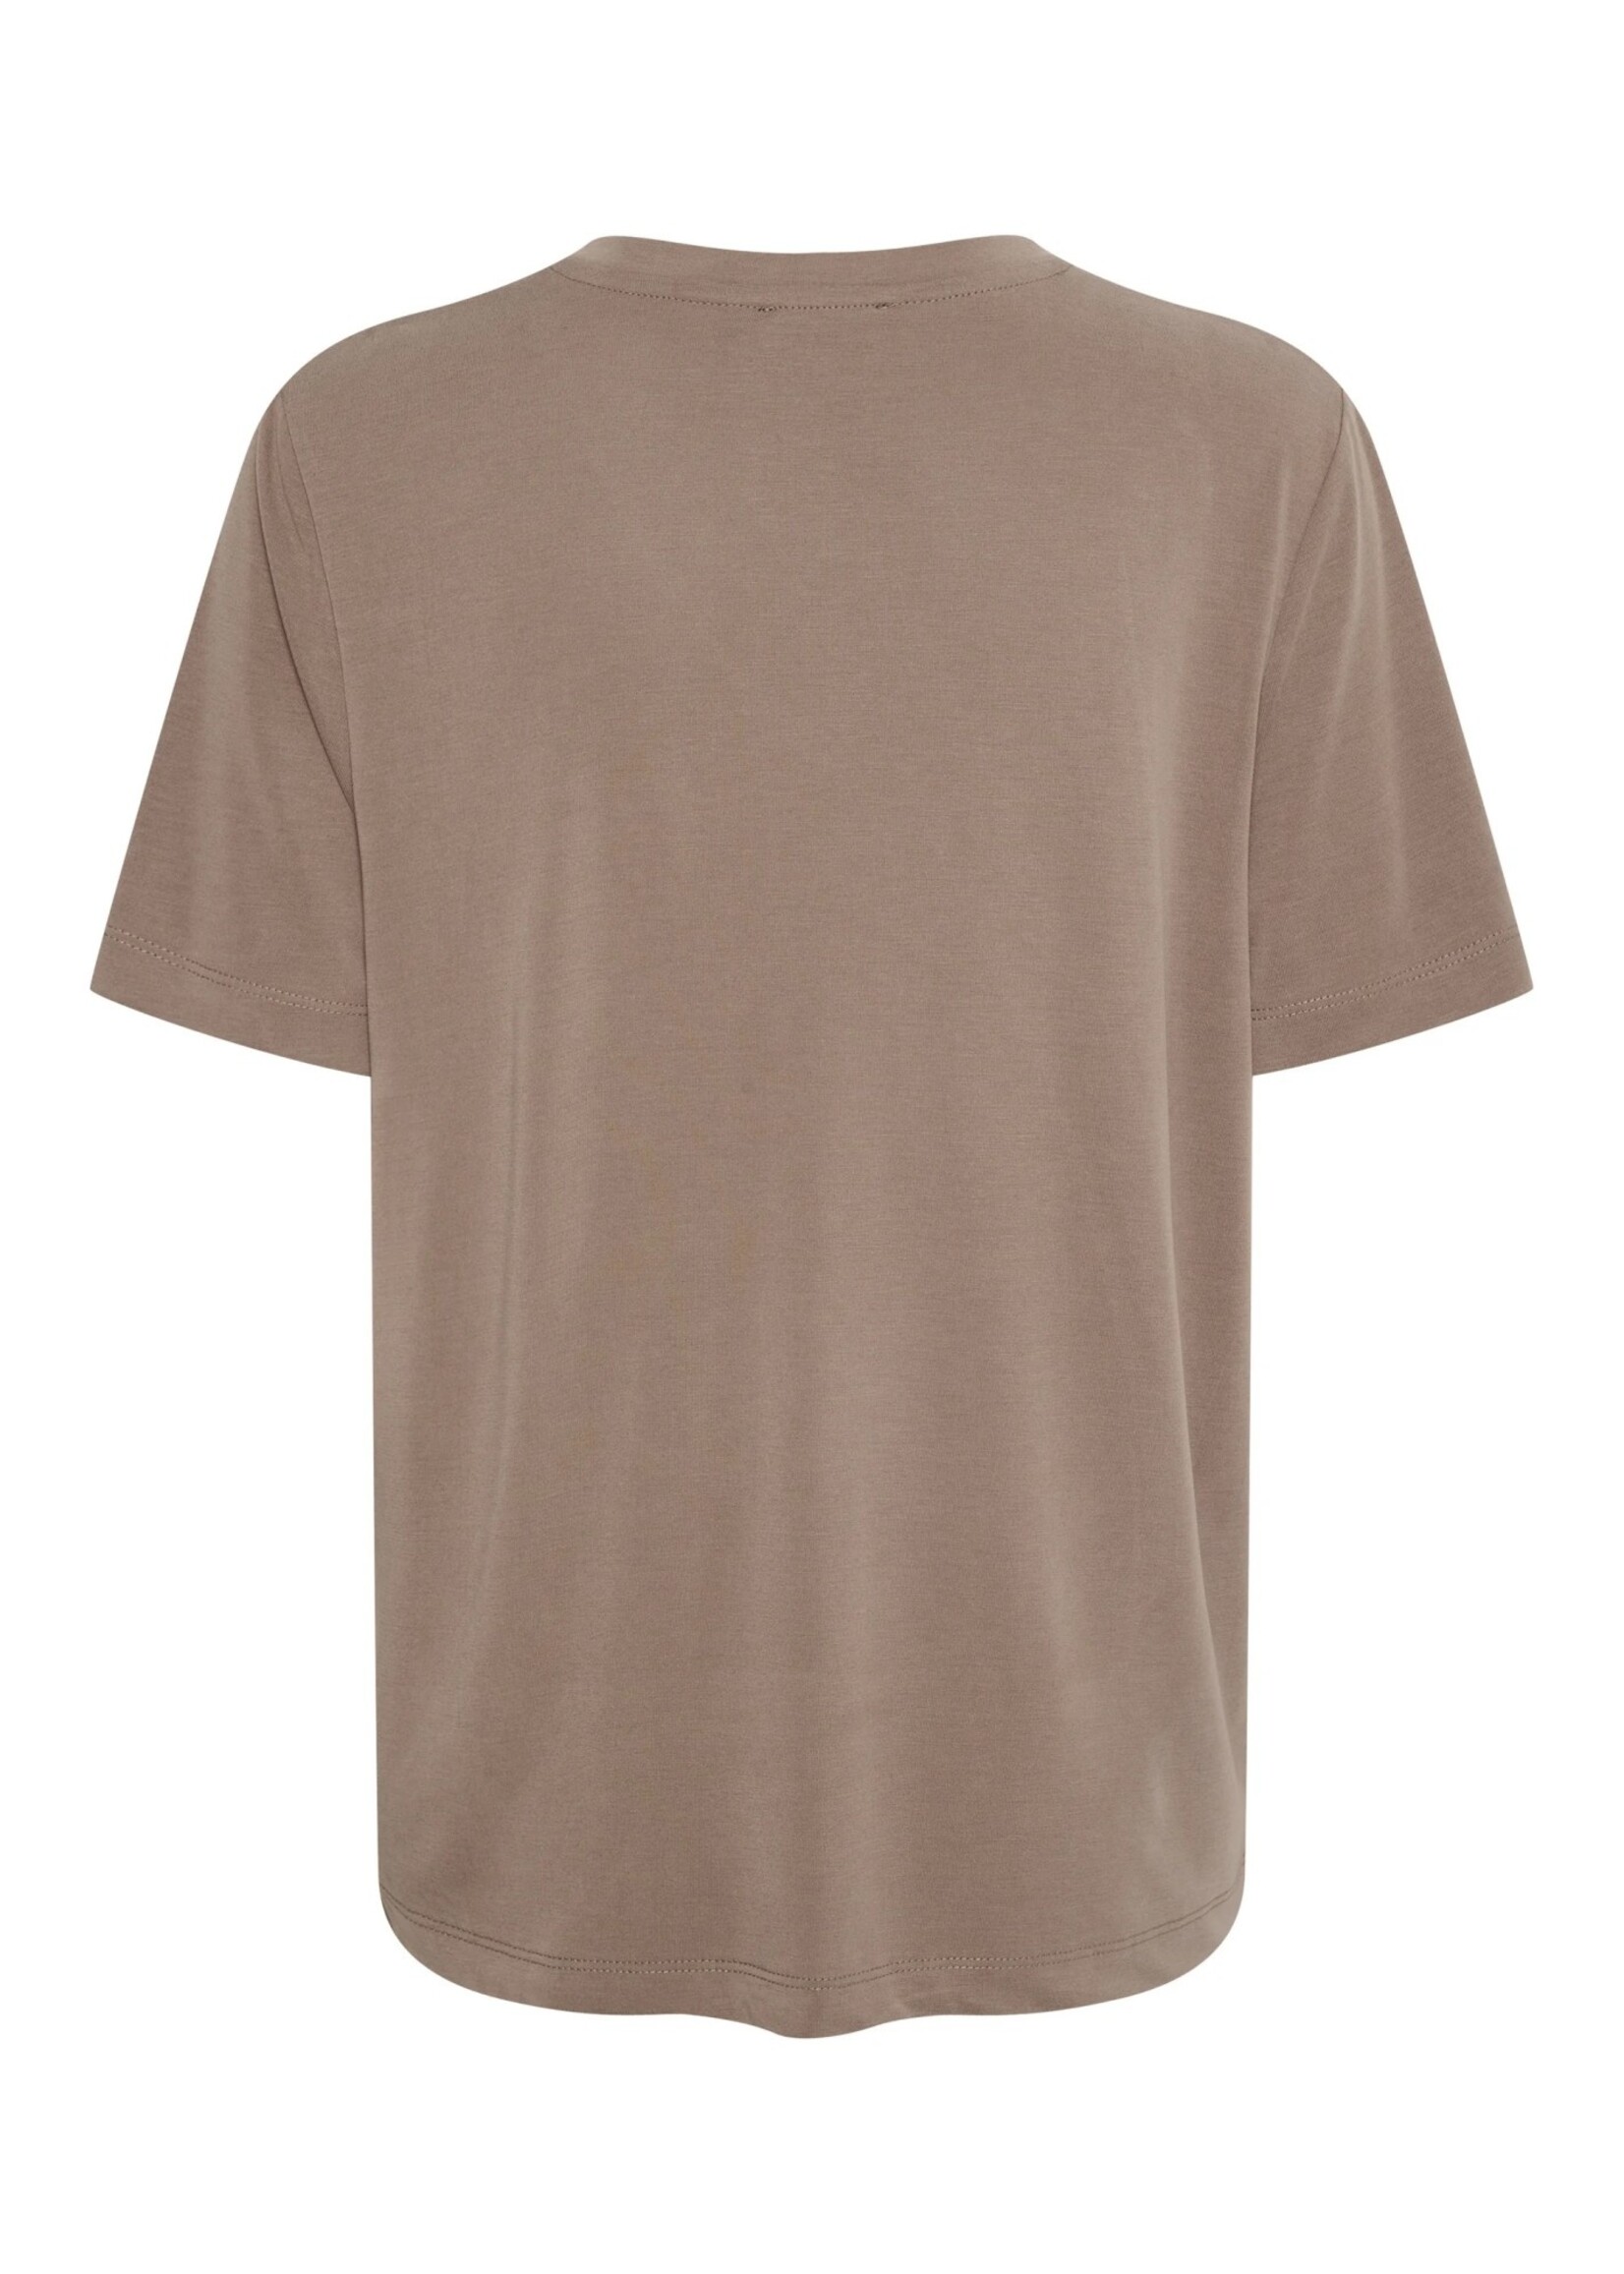 Soaked in Luxury Columbine Loose Fit V-Neck